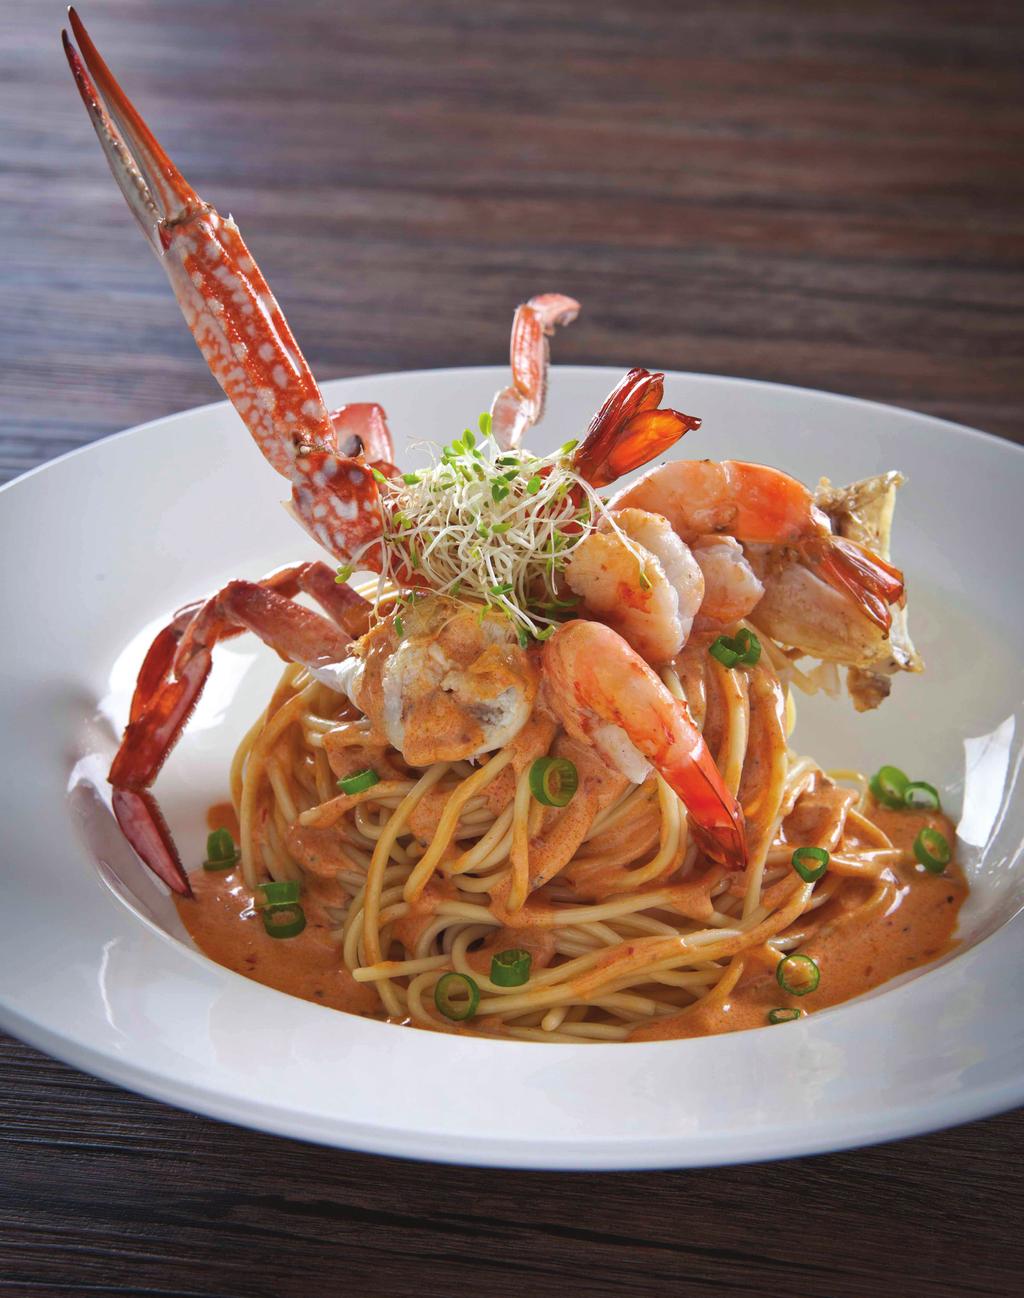 Plancha Seafood Spaghetti Vegetarian Contains nuts Contains fish Chef Specials Contains dairy product Prices are subject